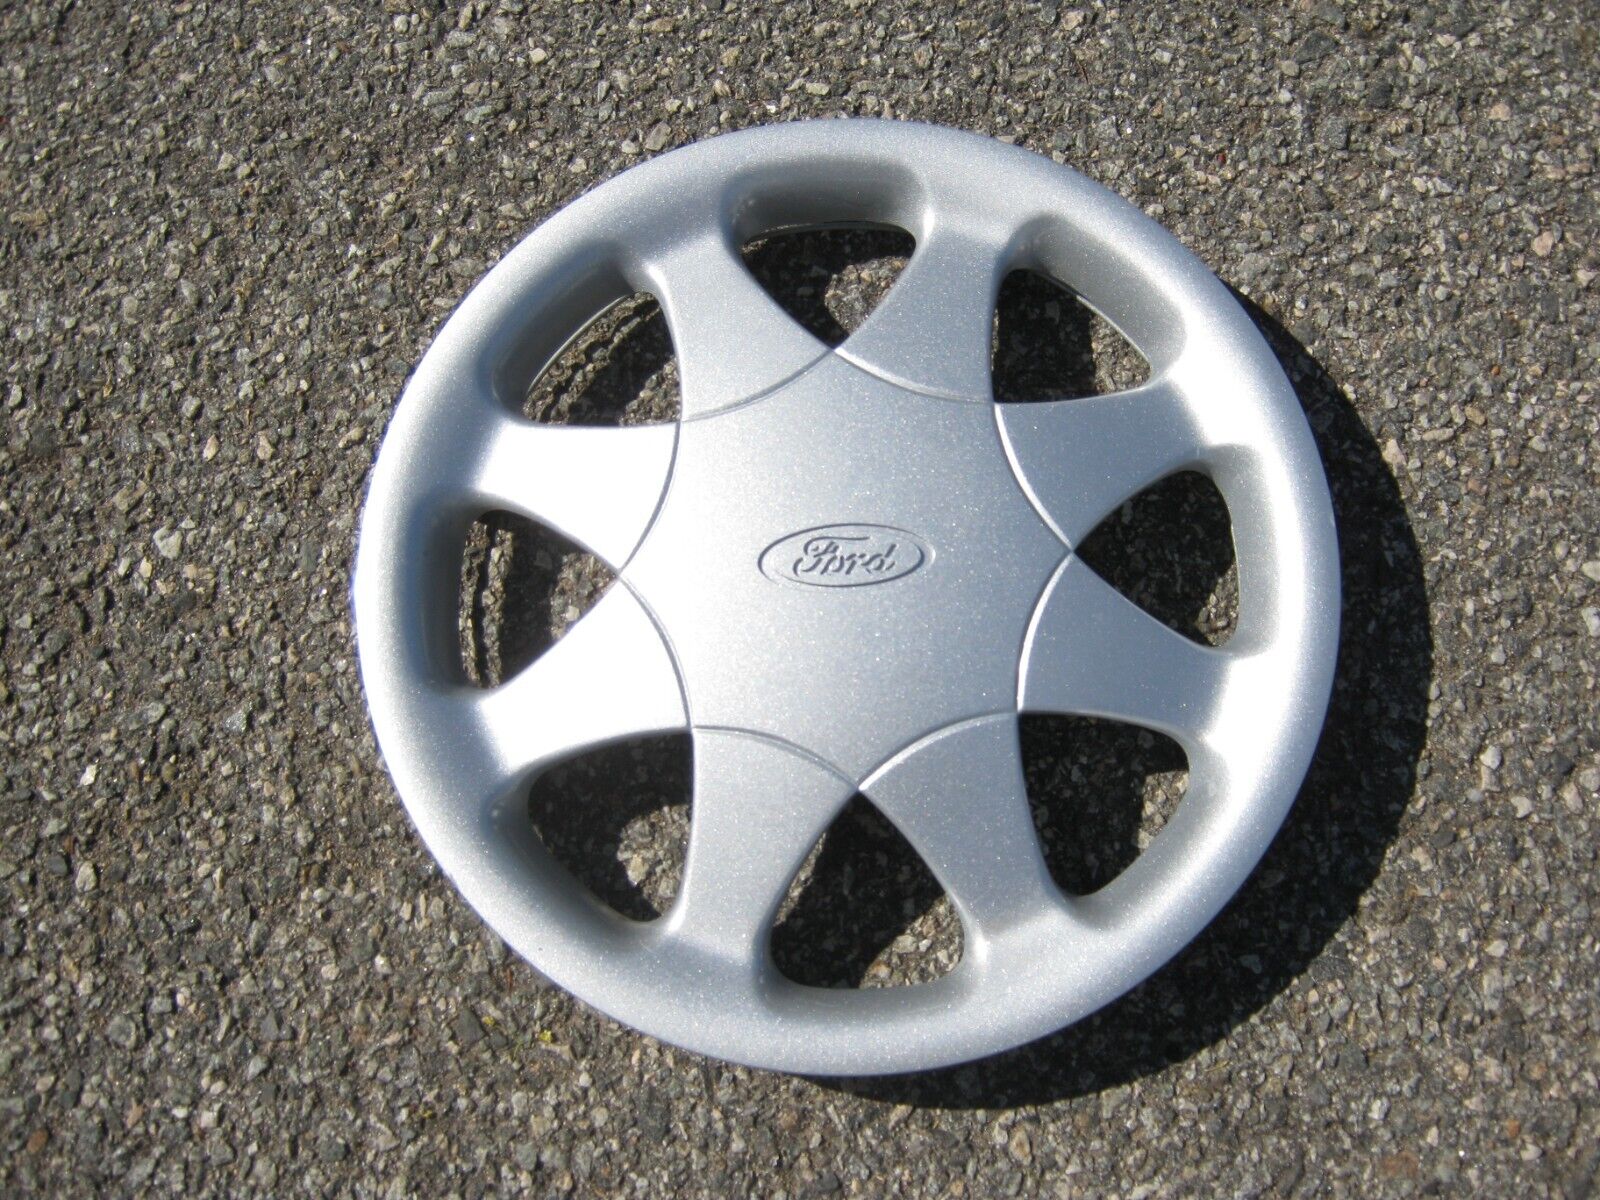 One genuinel Ford Aspire 13 inch hubcap wheel cover